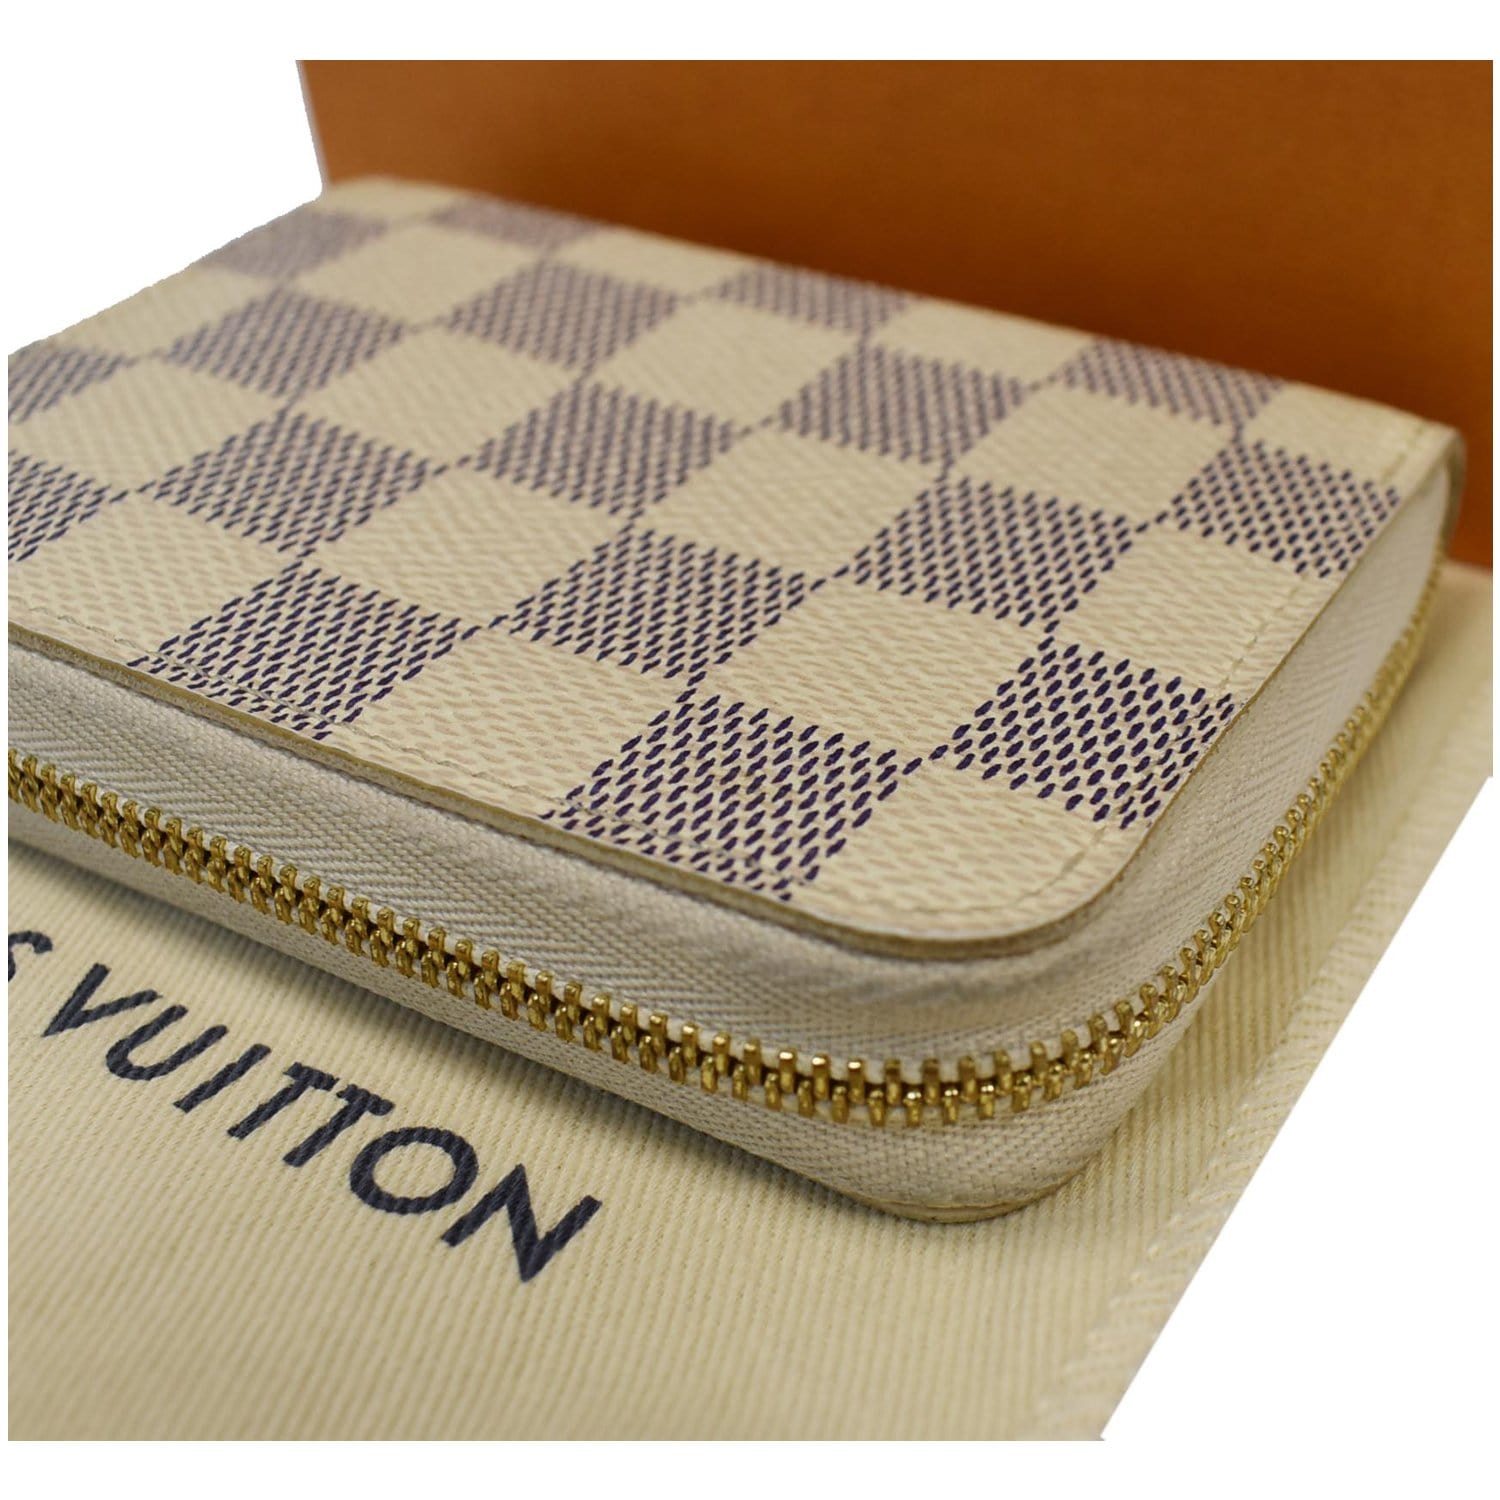 Zippy Coin Purse Damier Azur Canvas - Wallets and Small Leather